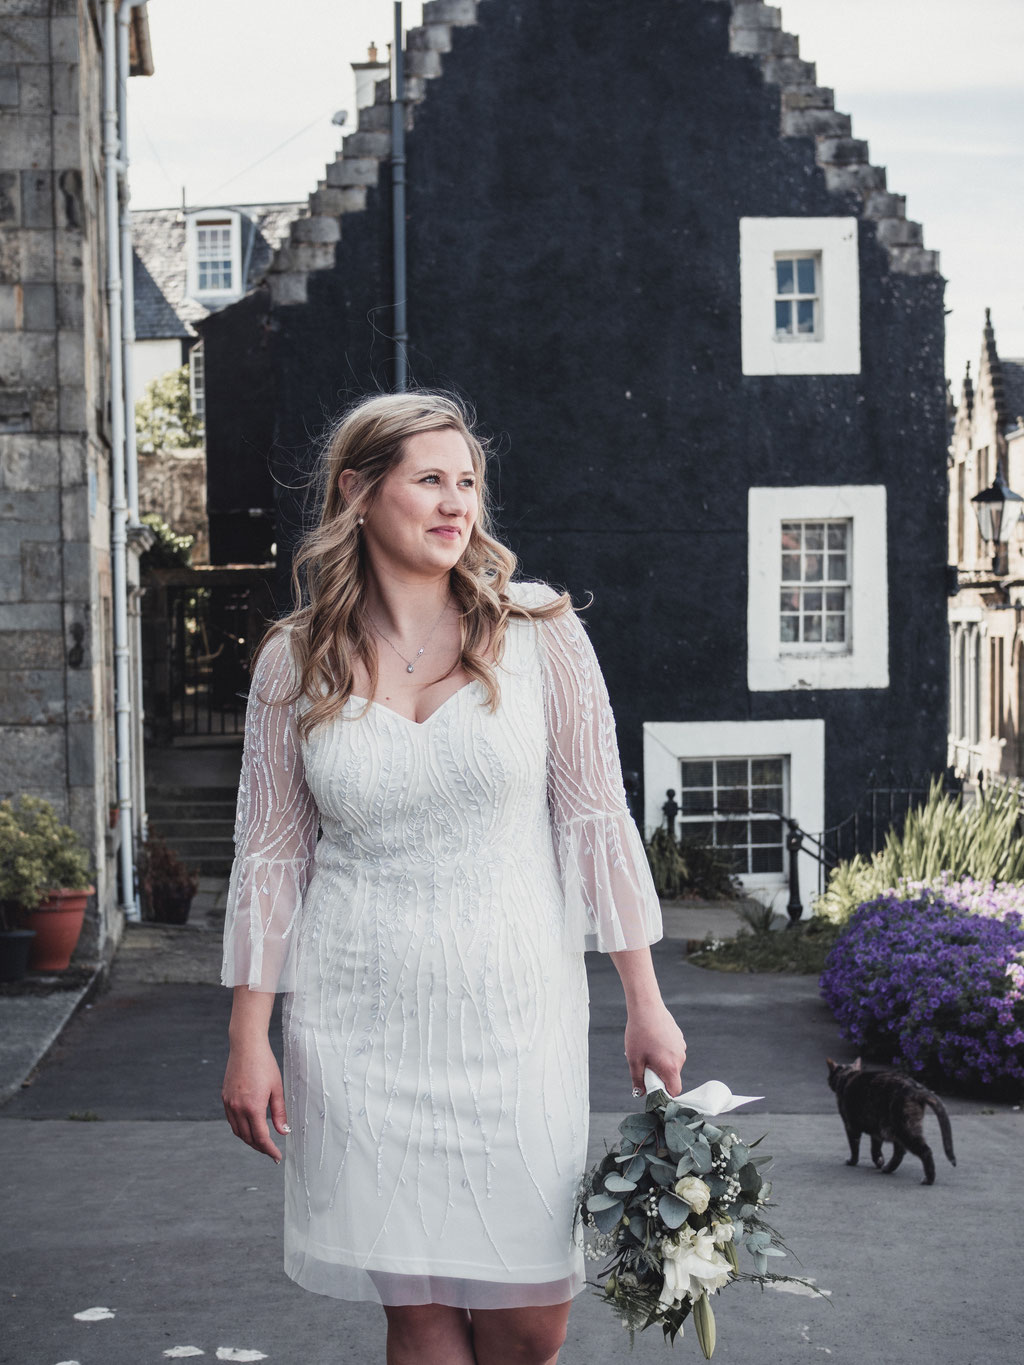 south queensferry wedding photography